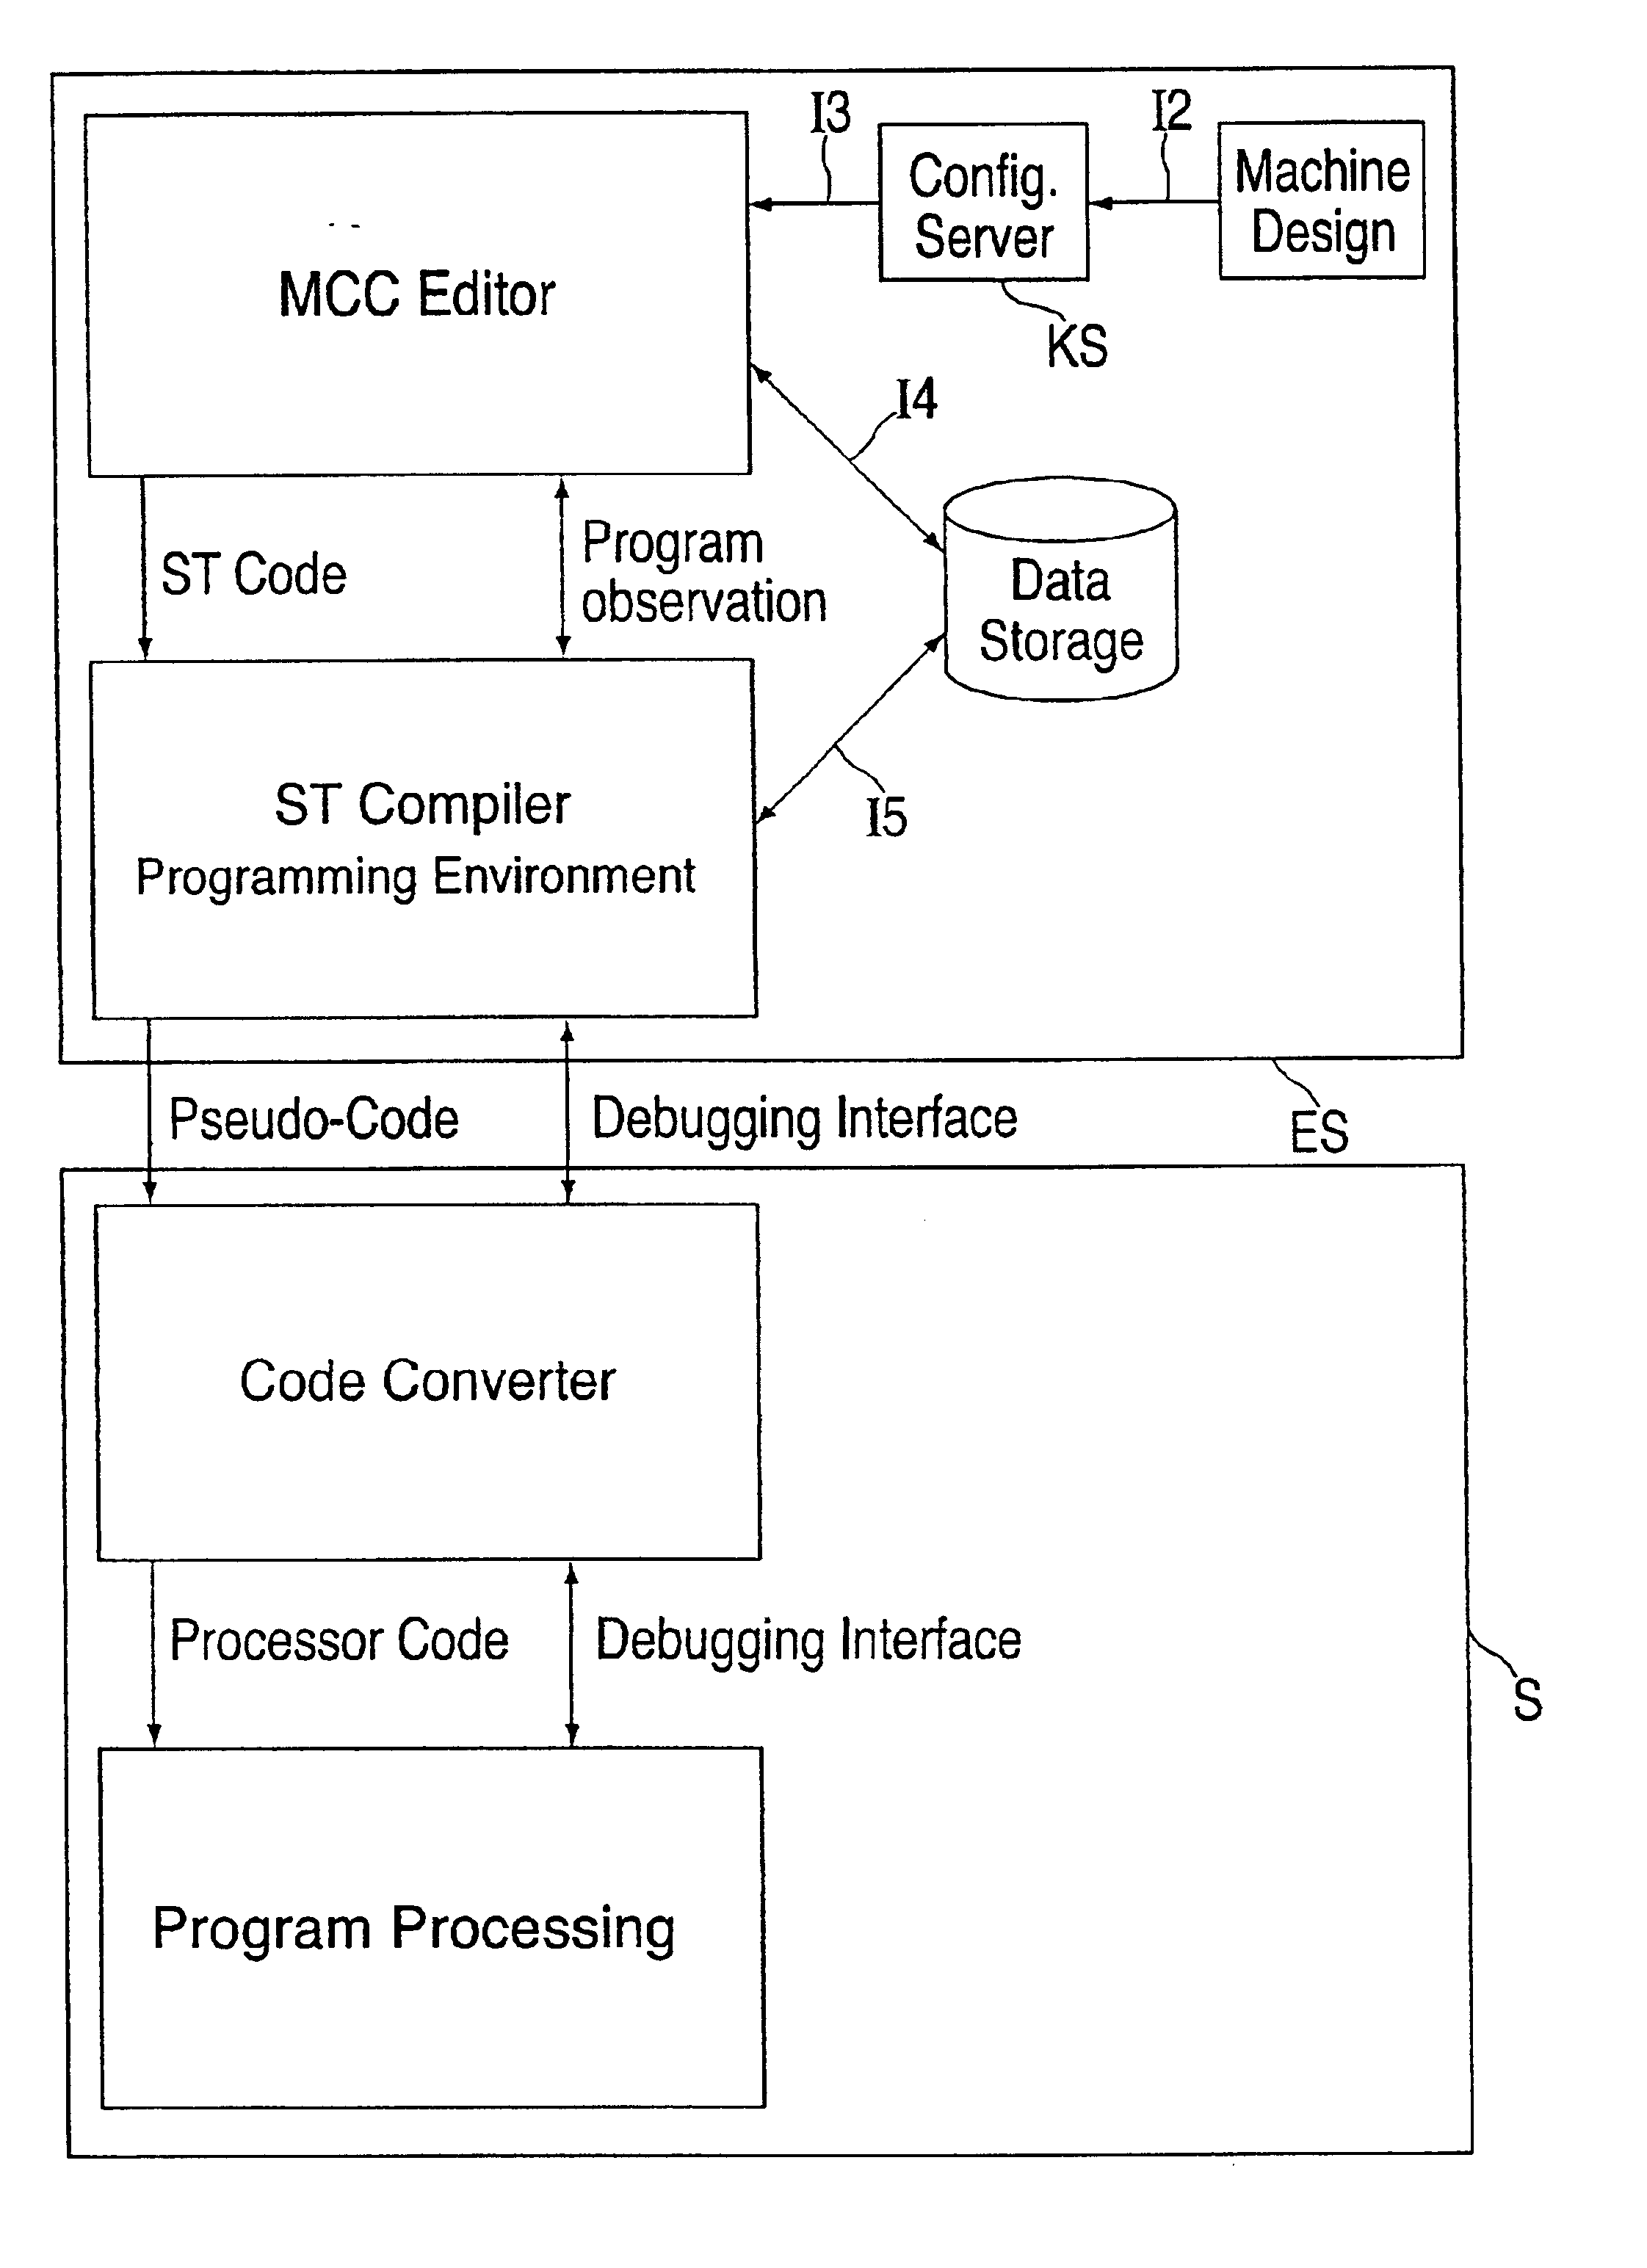 Flowchart programming for industrial controllers, in particular motion controllers